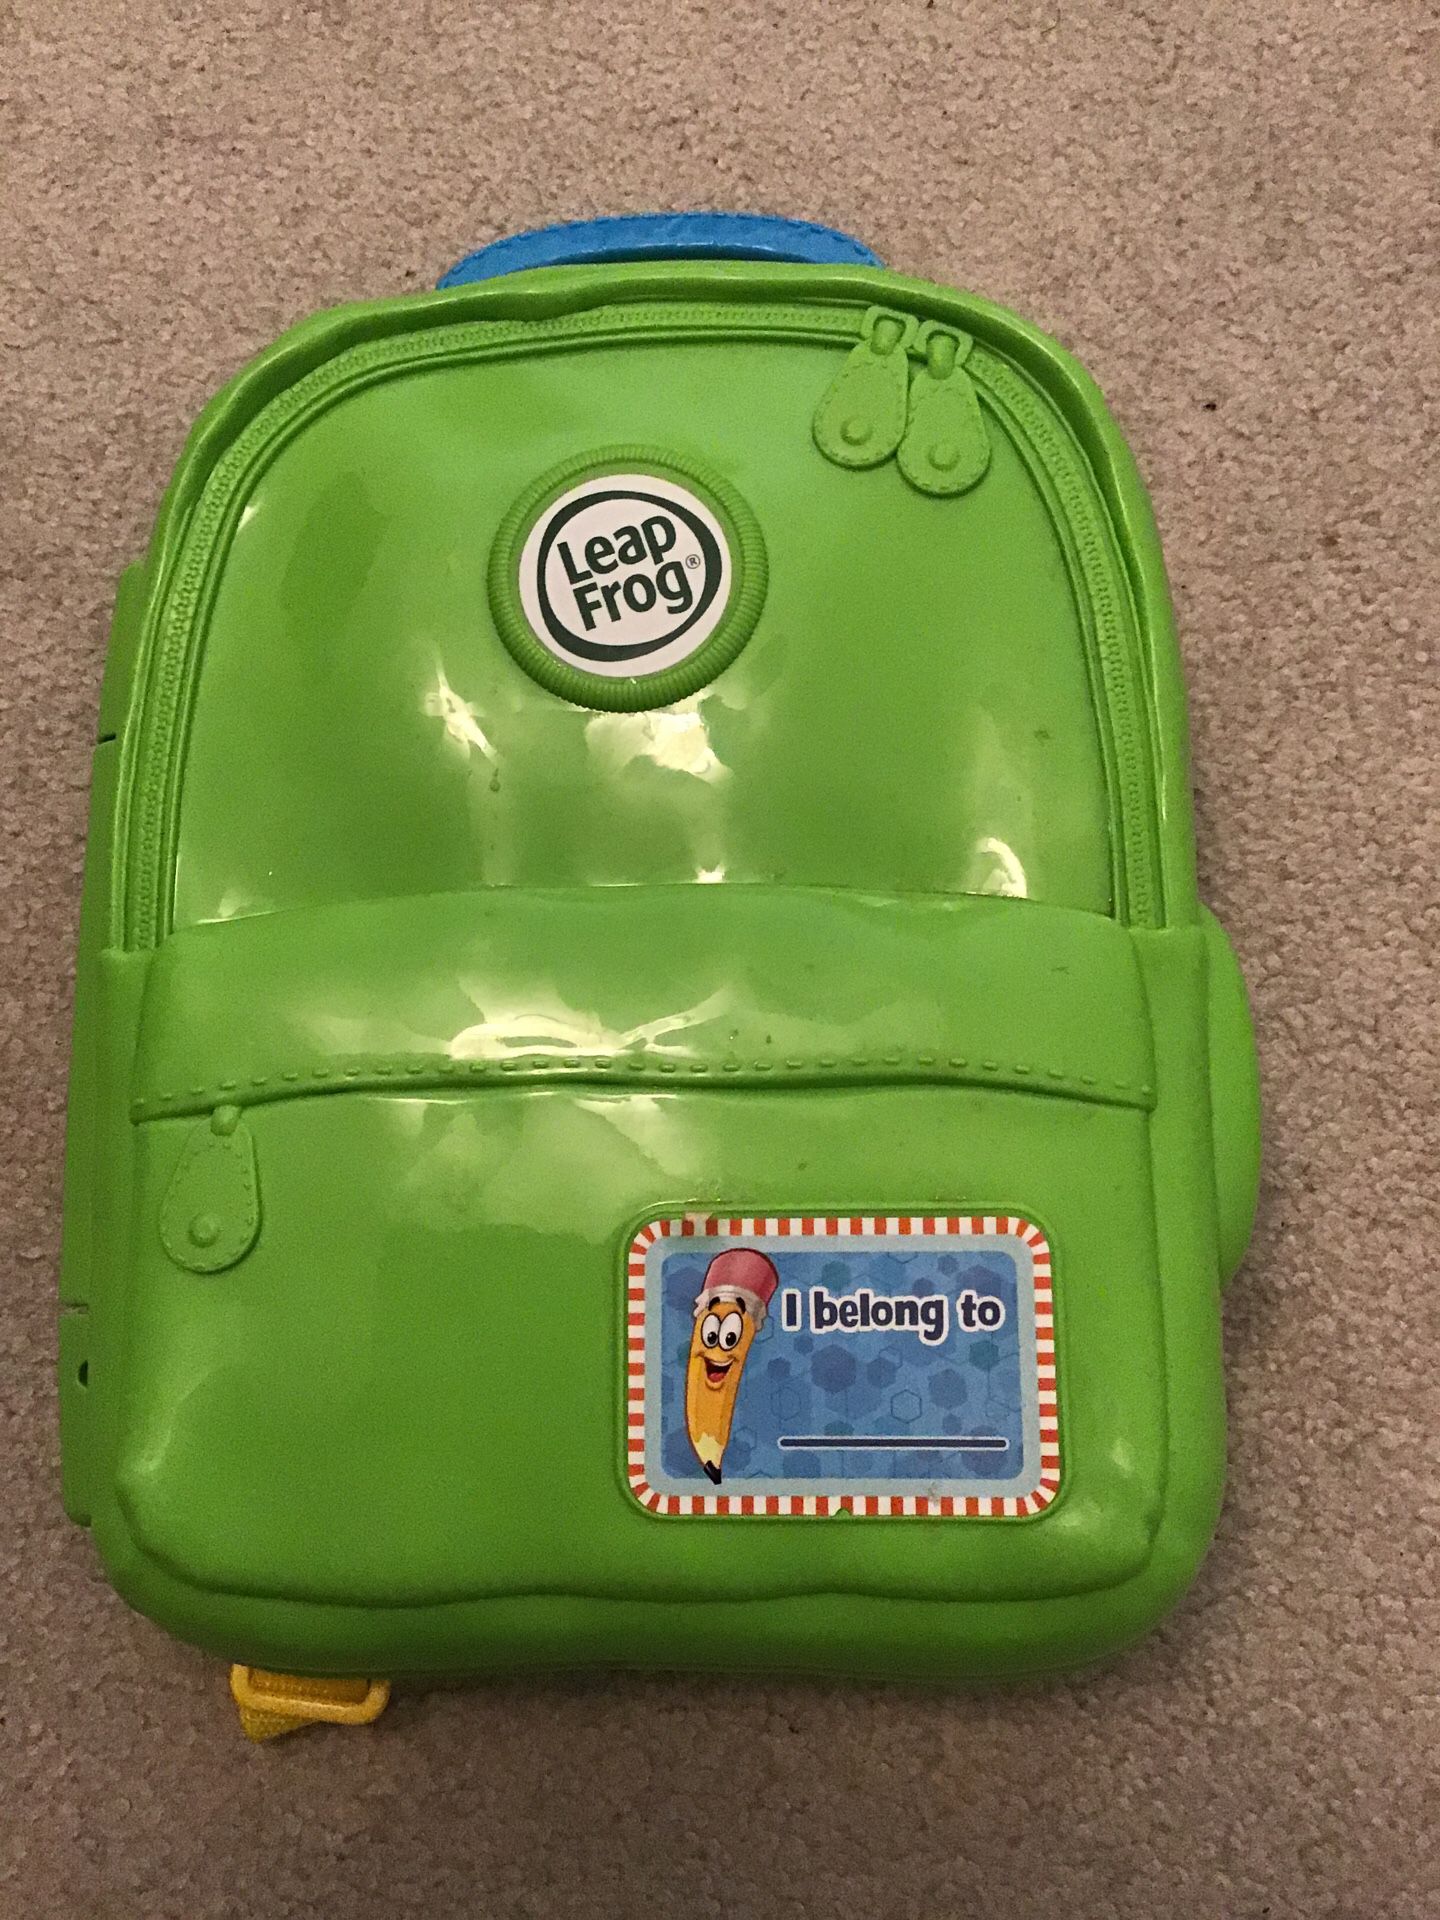 Leap Frog ABC Learn With Me Backpack Alphabet Learning